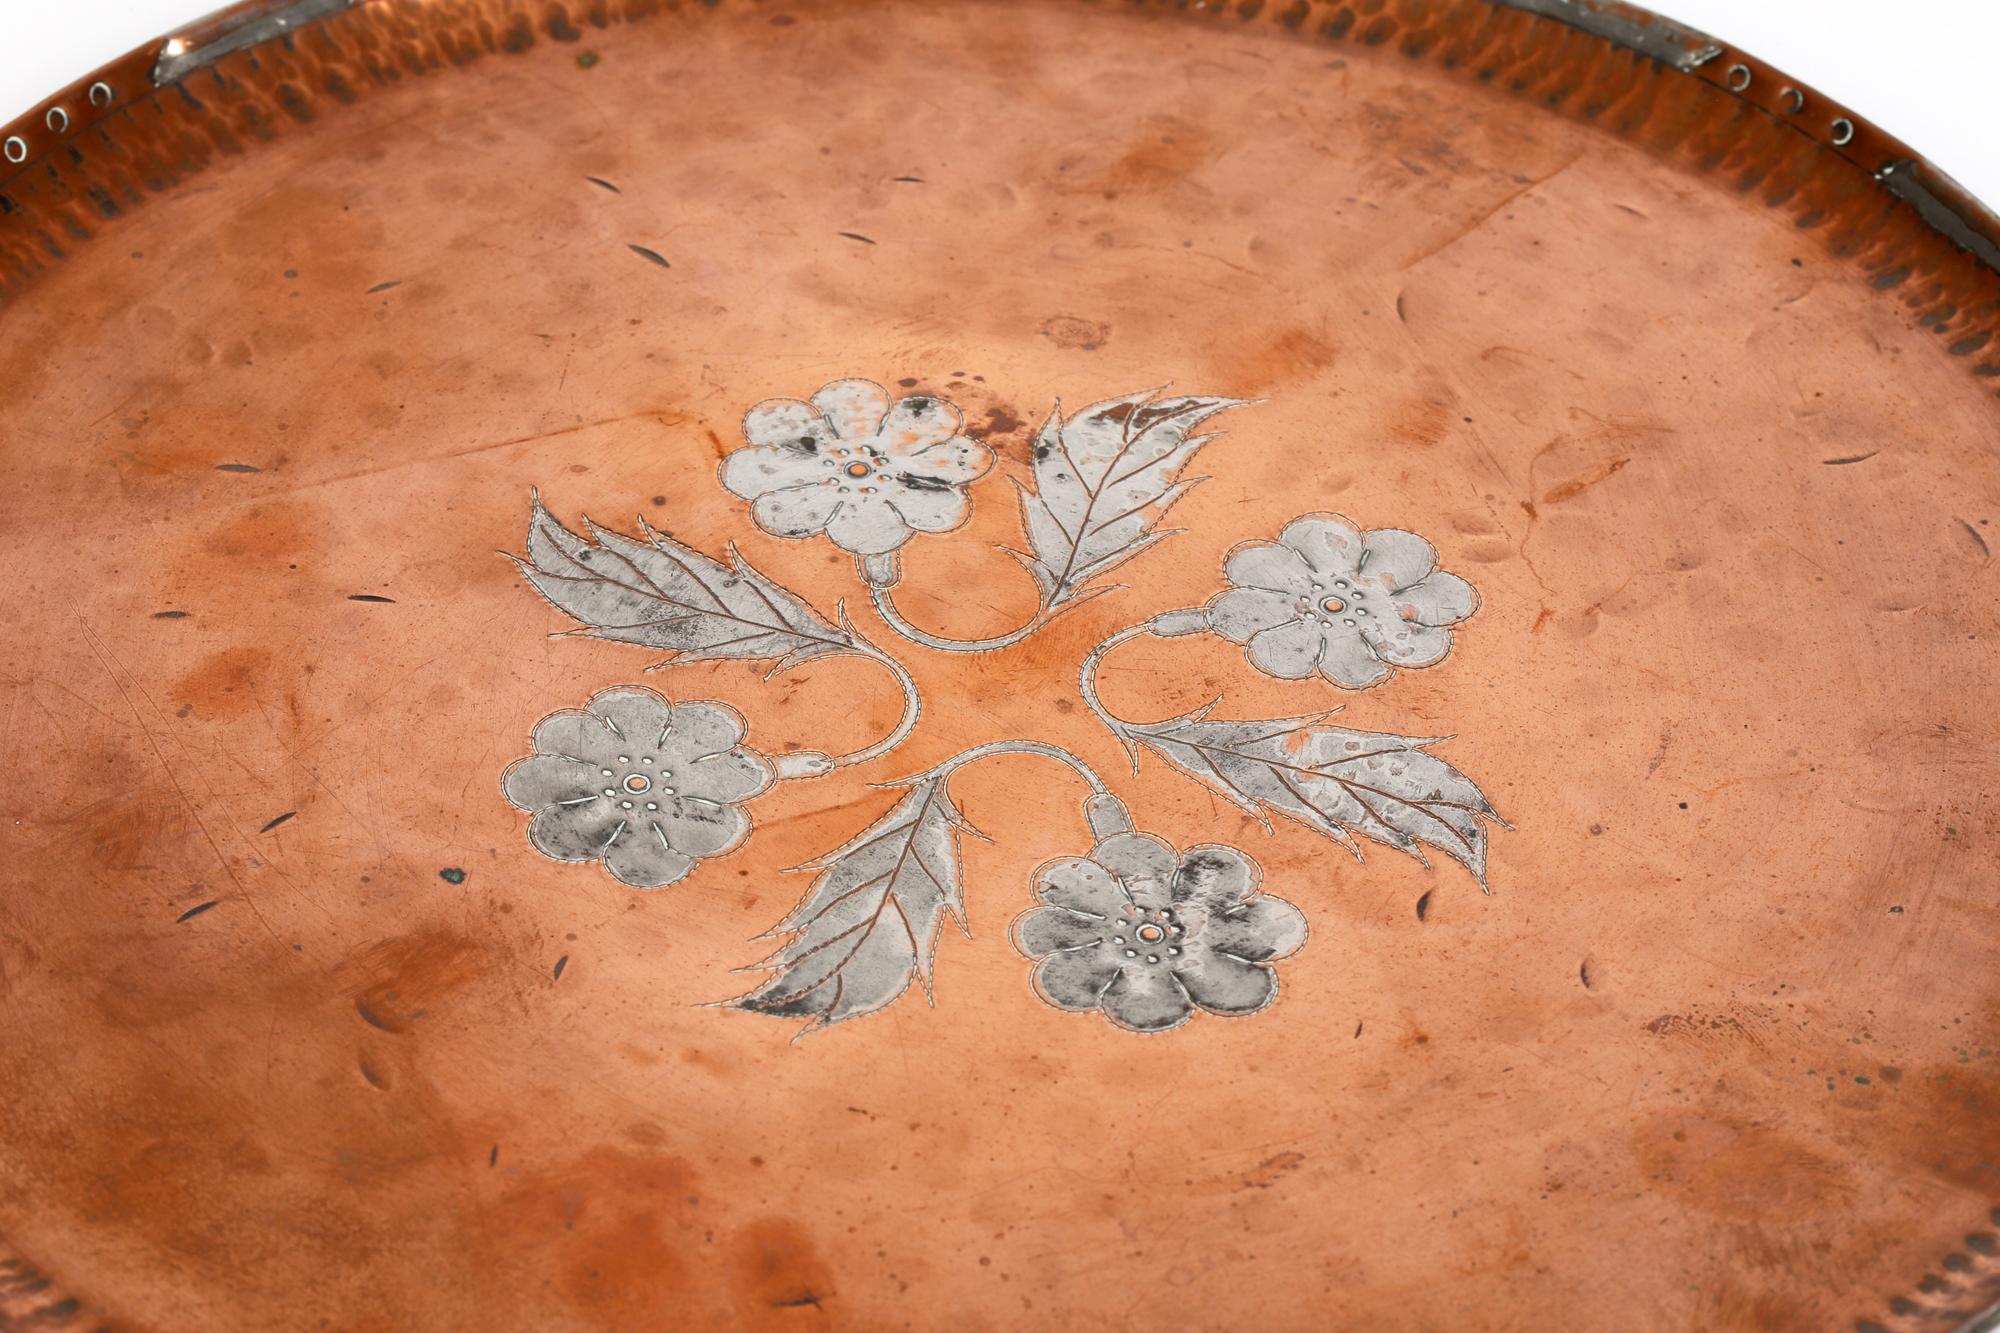 Arts & Crafts copper inlaid tray with pewter floral designs in the manner of Hugh Wallis and signed PG dating from around 1900. The rounded tray has a raised folded edge rim with a planished finish and with stud work and inlaid pewter designs. The